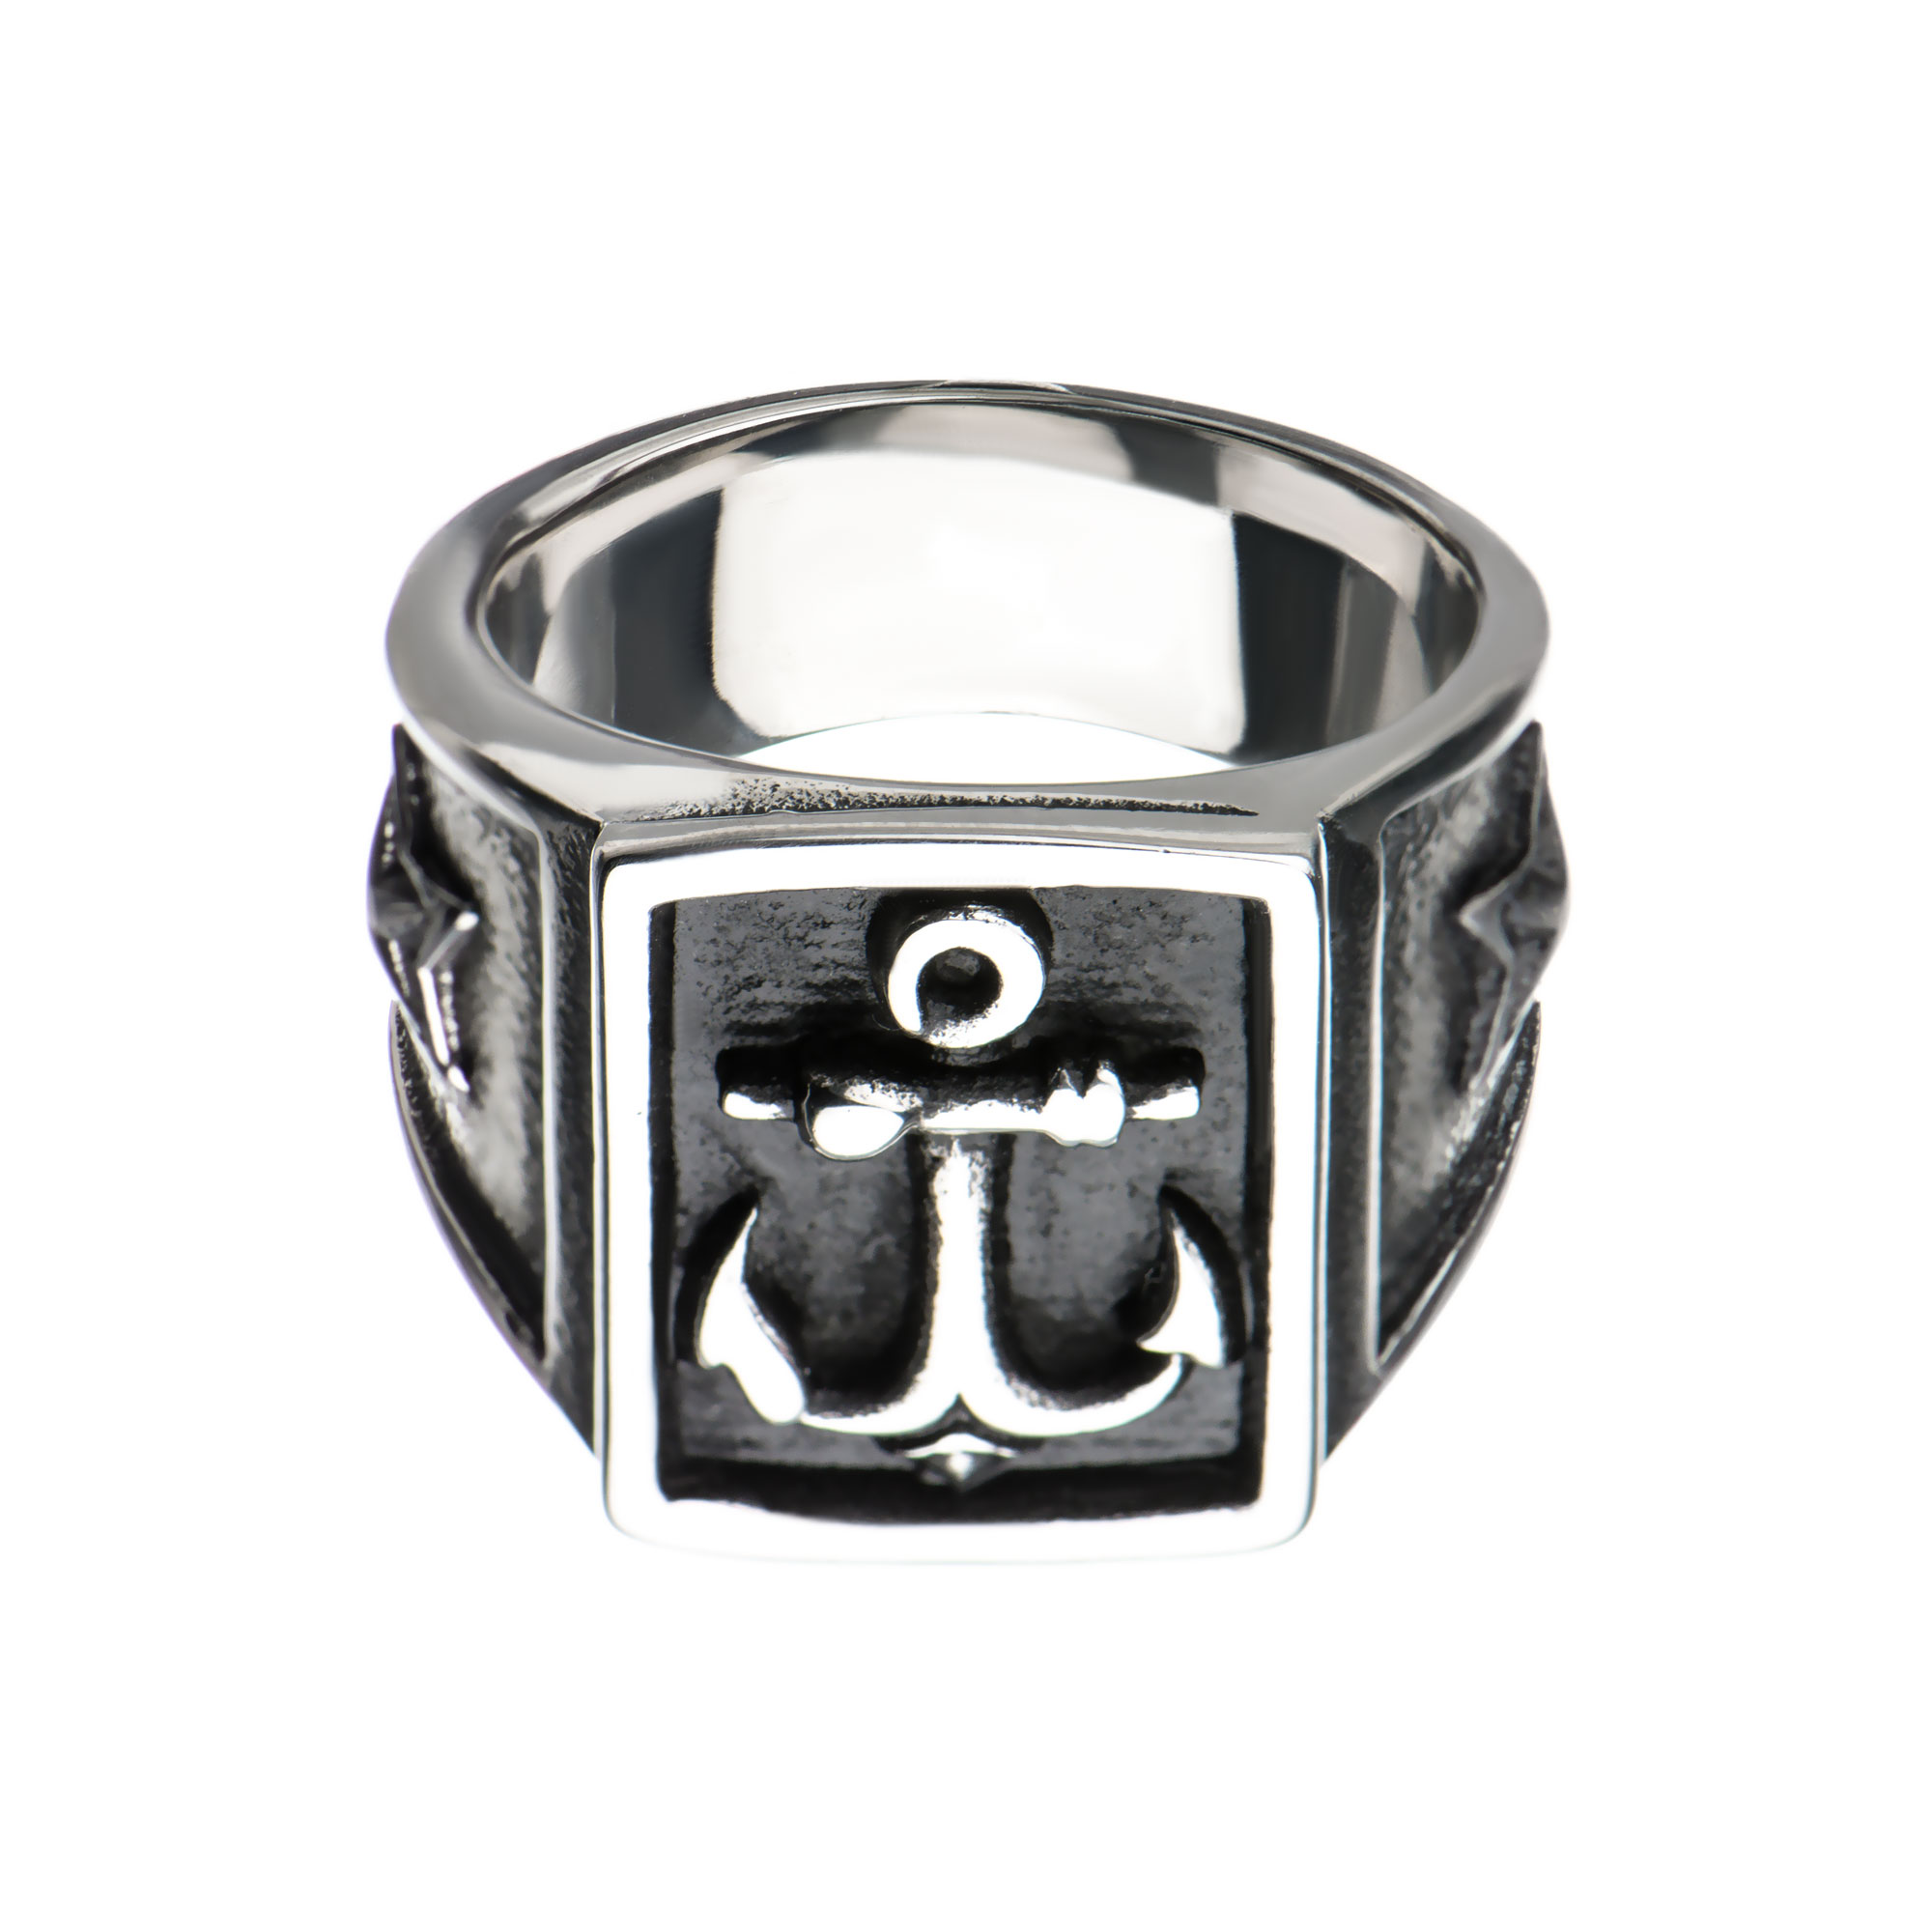 Steel & Black Plated Oxidized Anchor Signet Ring Image 2 Mitchell's Jewelry Norman, OK